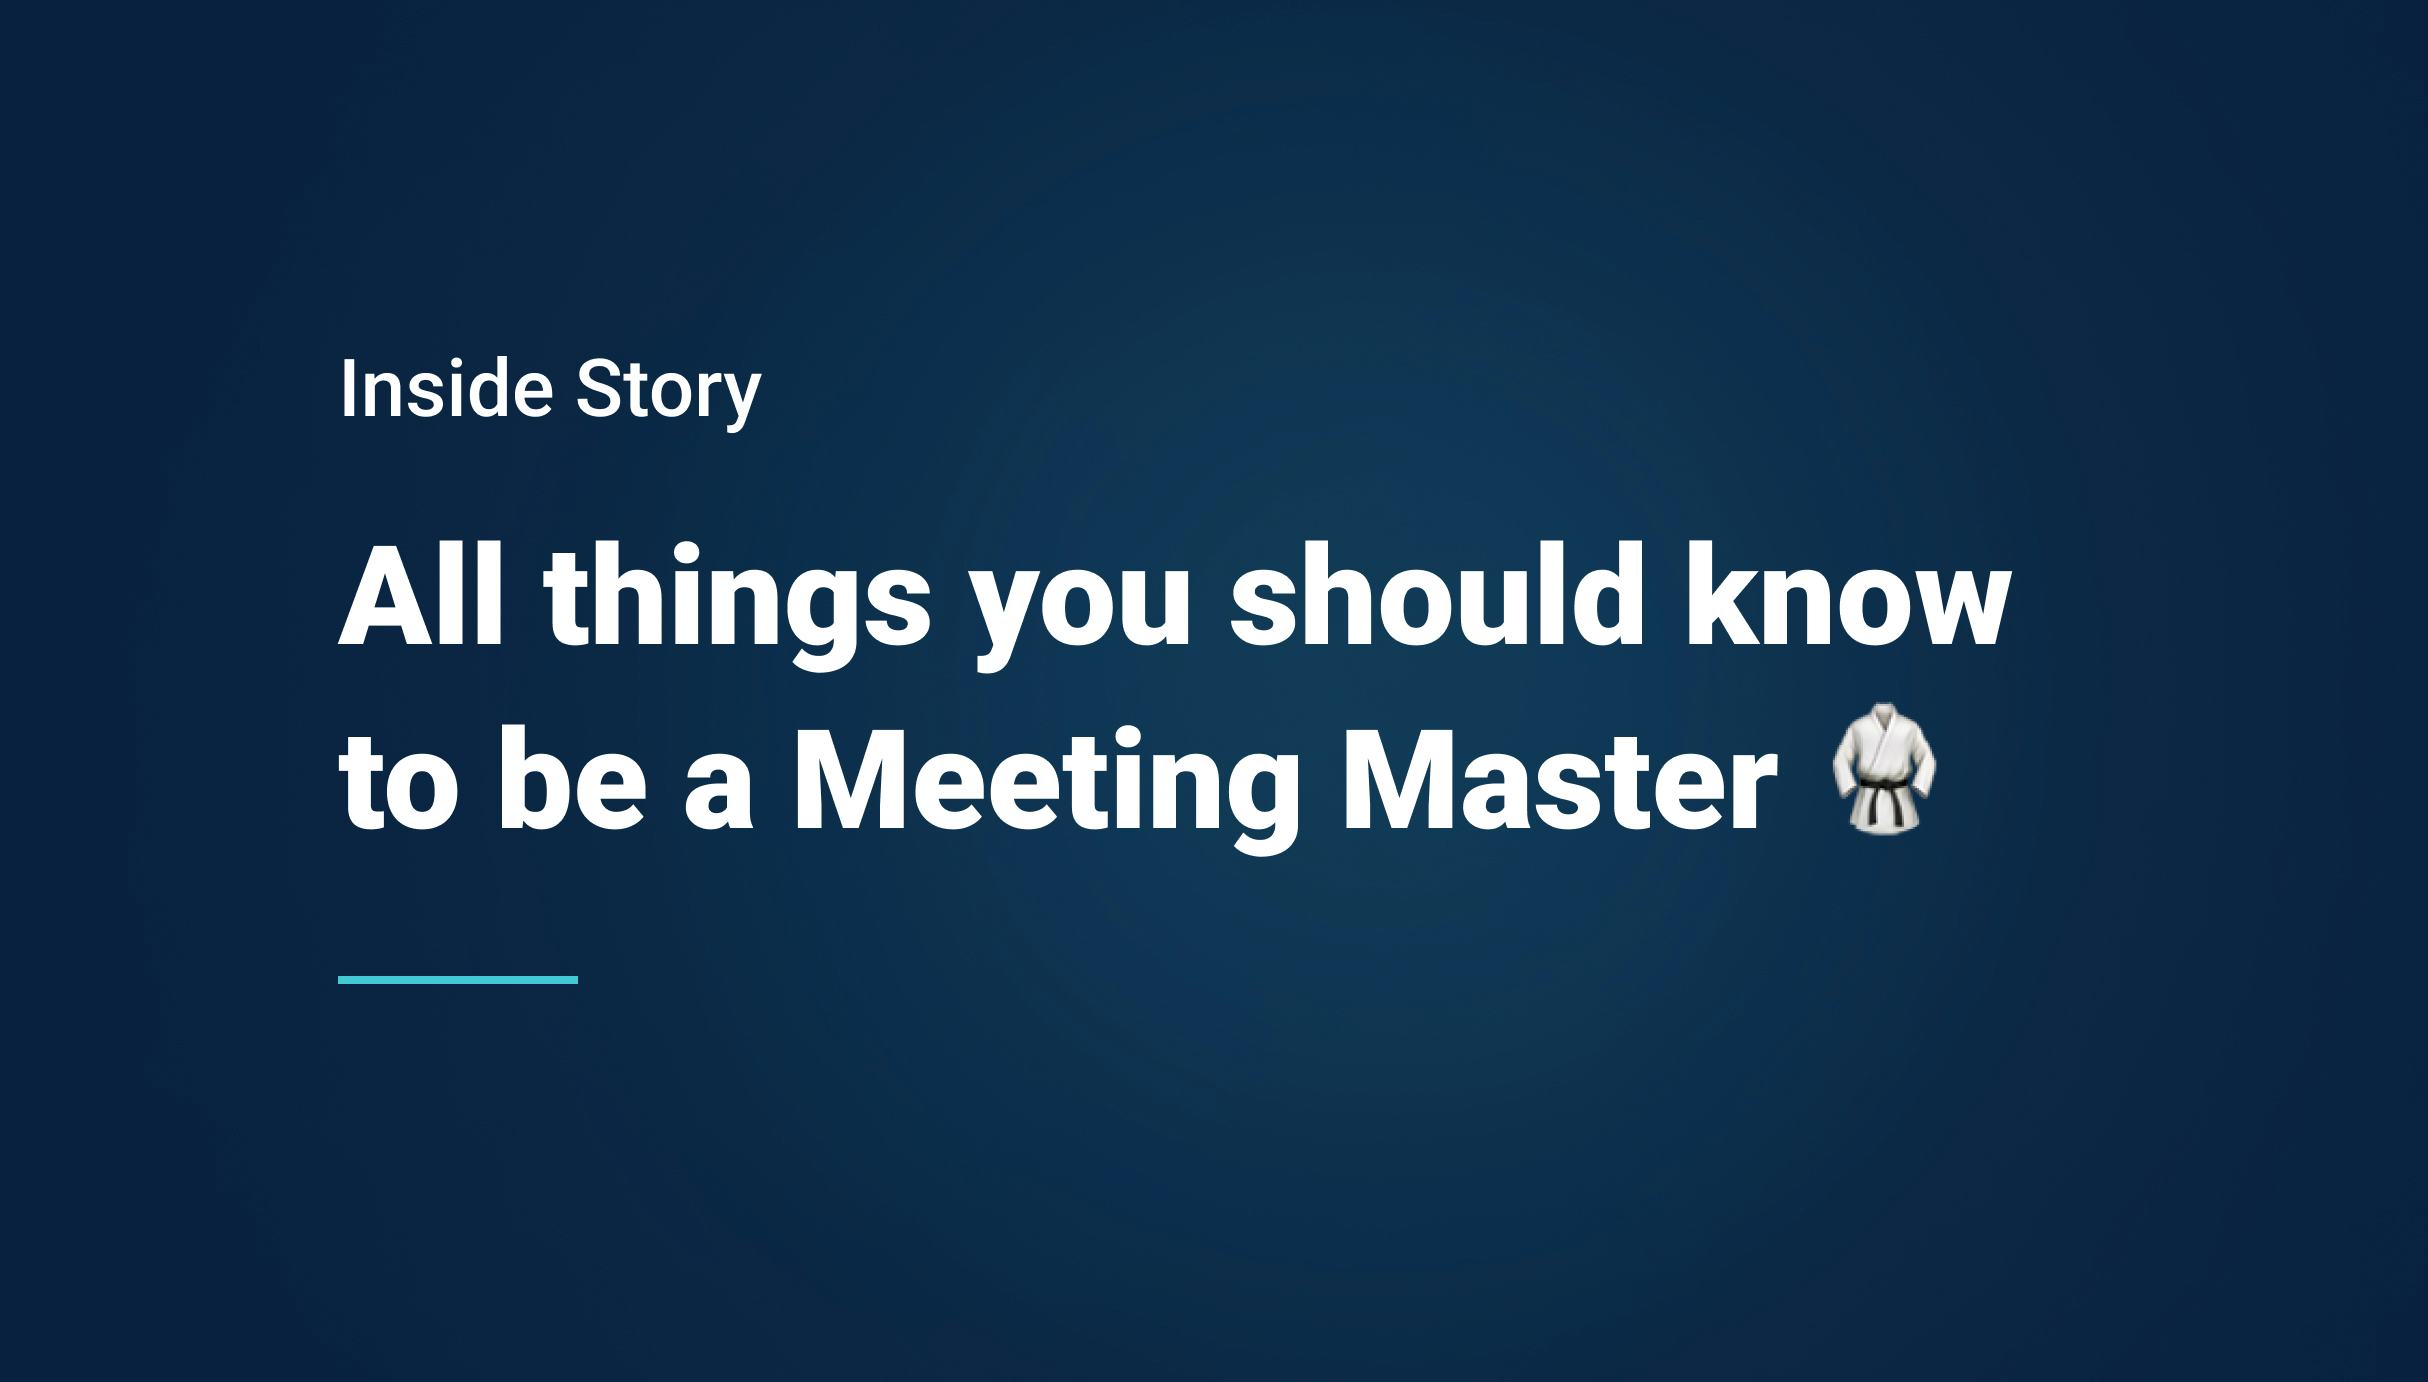 All things you should know to be a Meeting Master - Qovery